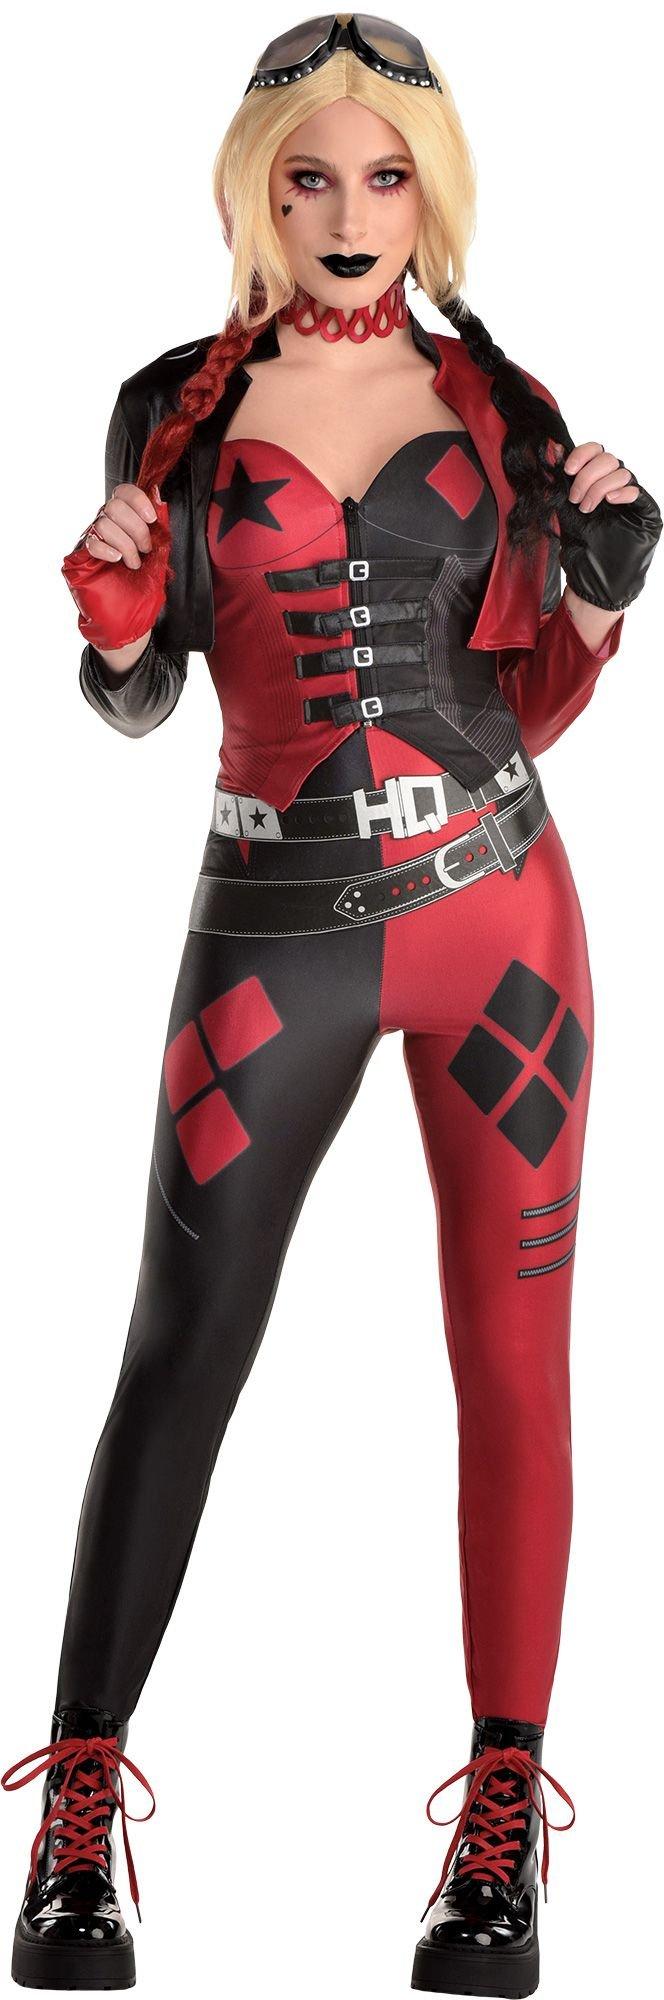 Harley Quinn Costumes, Cosplay & Outfits | Party City